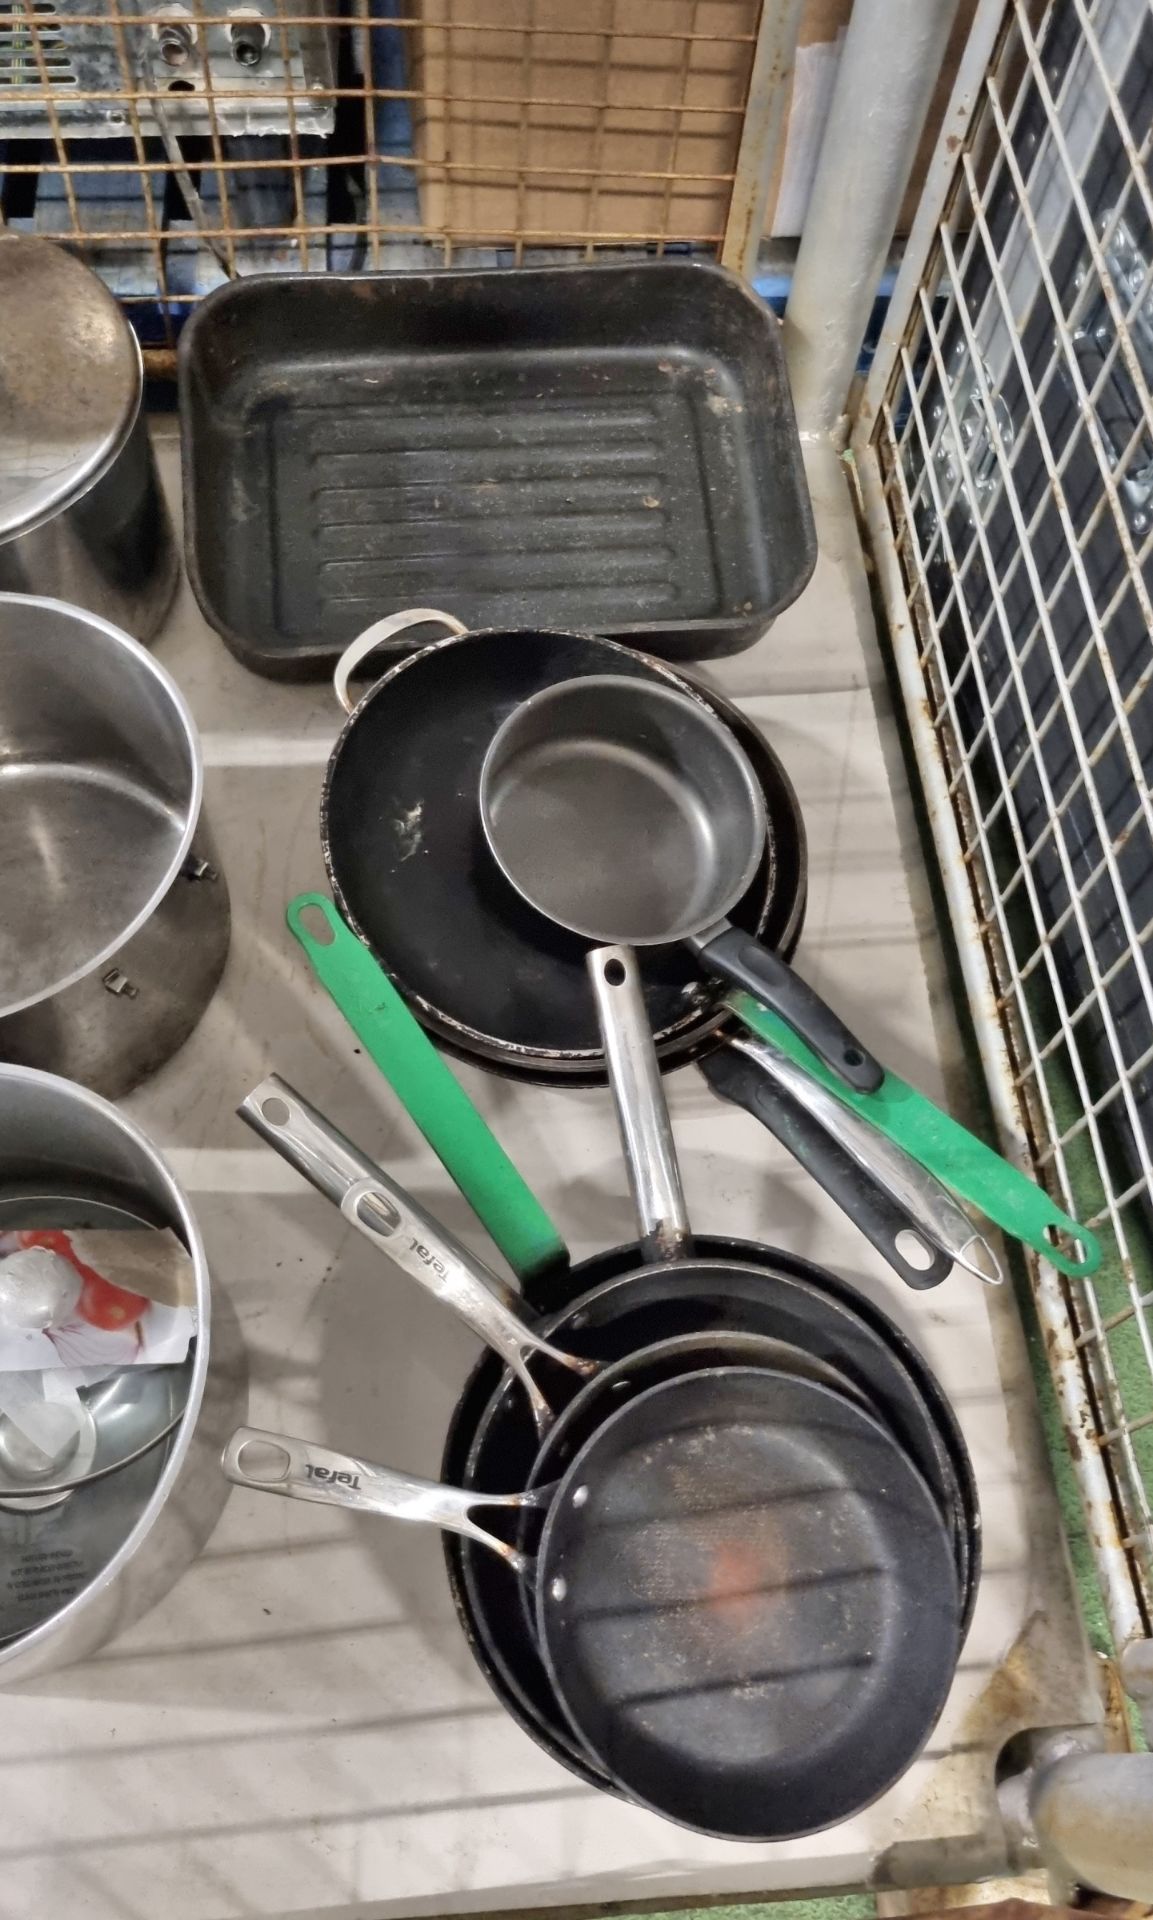 Catering - small and large frying pans, 4x 11 inch pans, 7x small bain maries, roast dish - Image 5 of 5